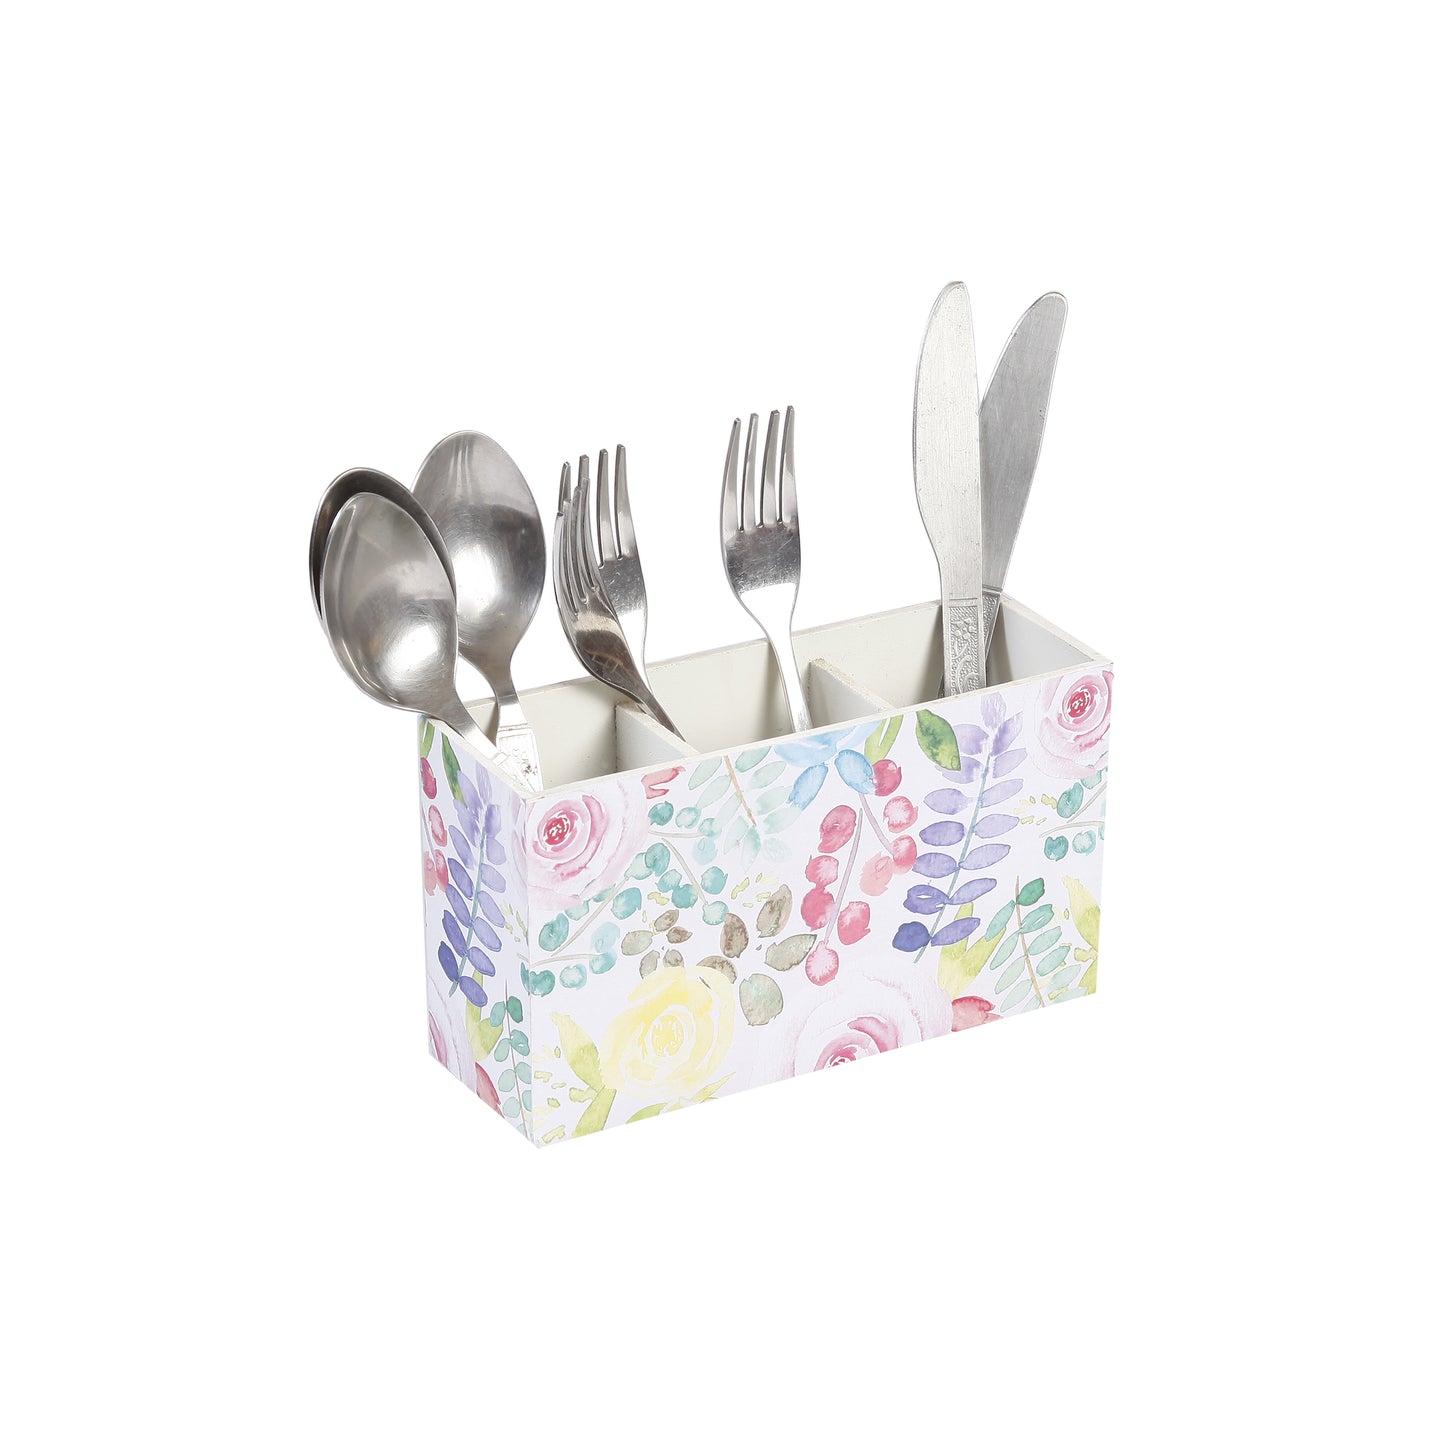 A Tiny Mistake Watercolour Roses Wooden Cutlery Holder, 18 x 10 x 6.5 cm